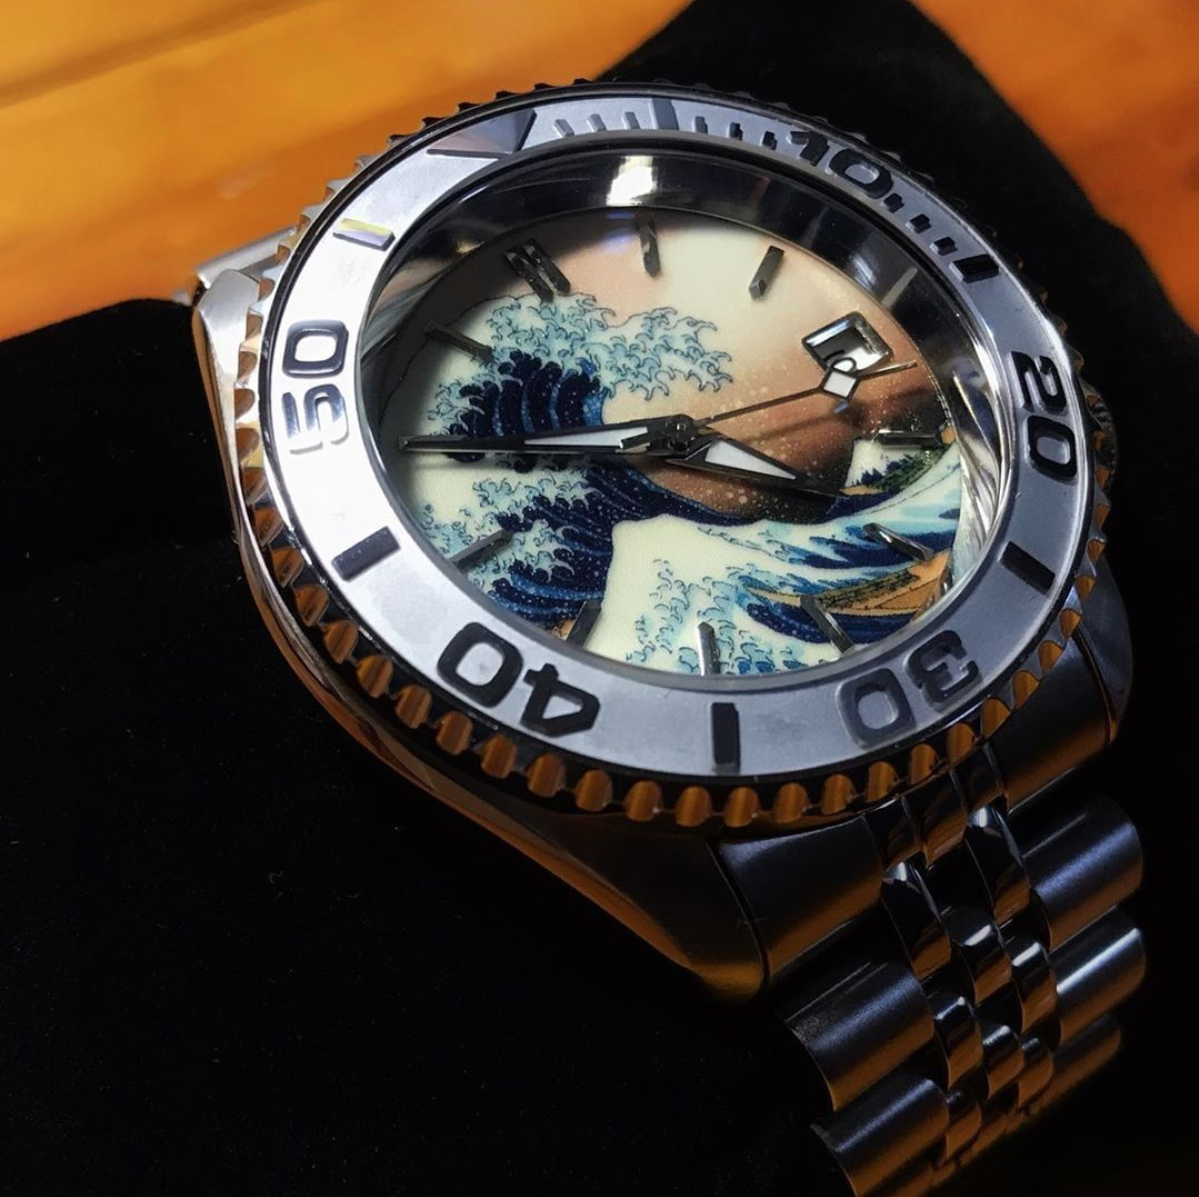 Seiko modding in 2020 is just getting better and better